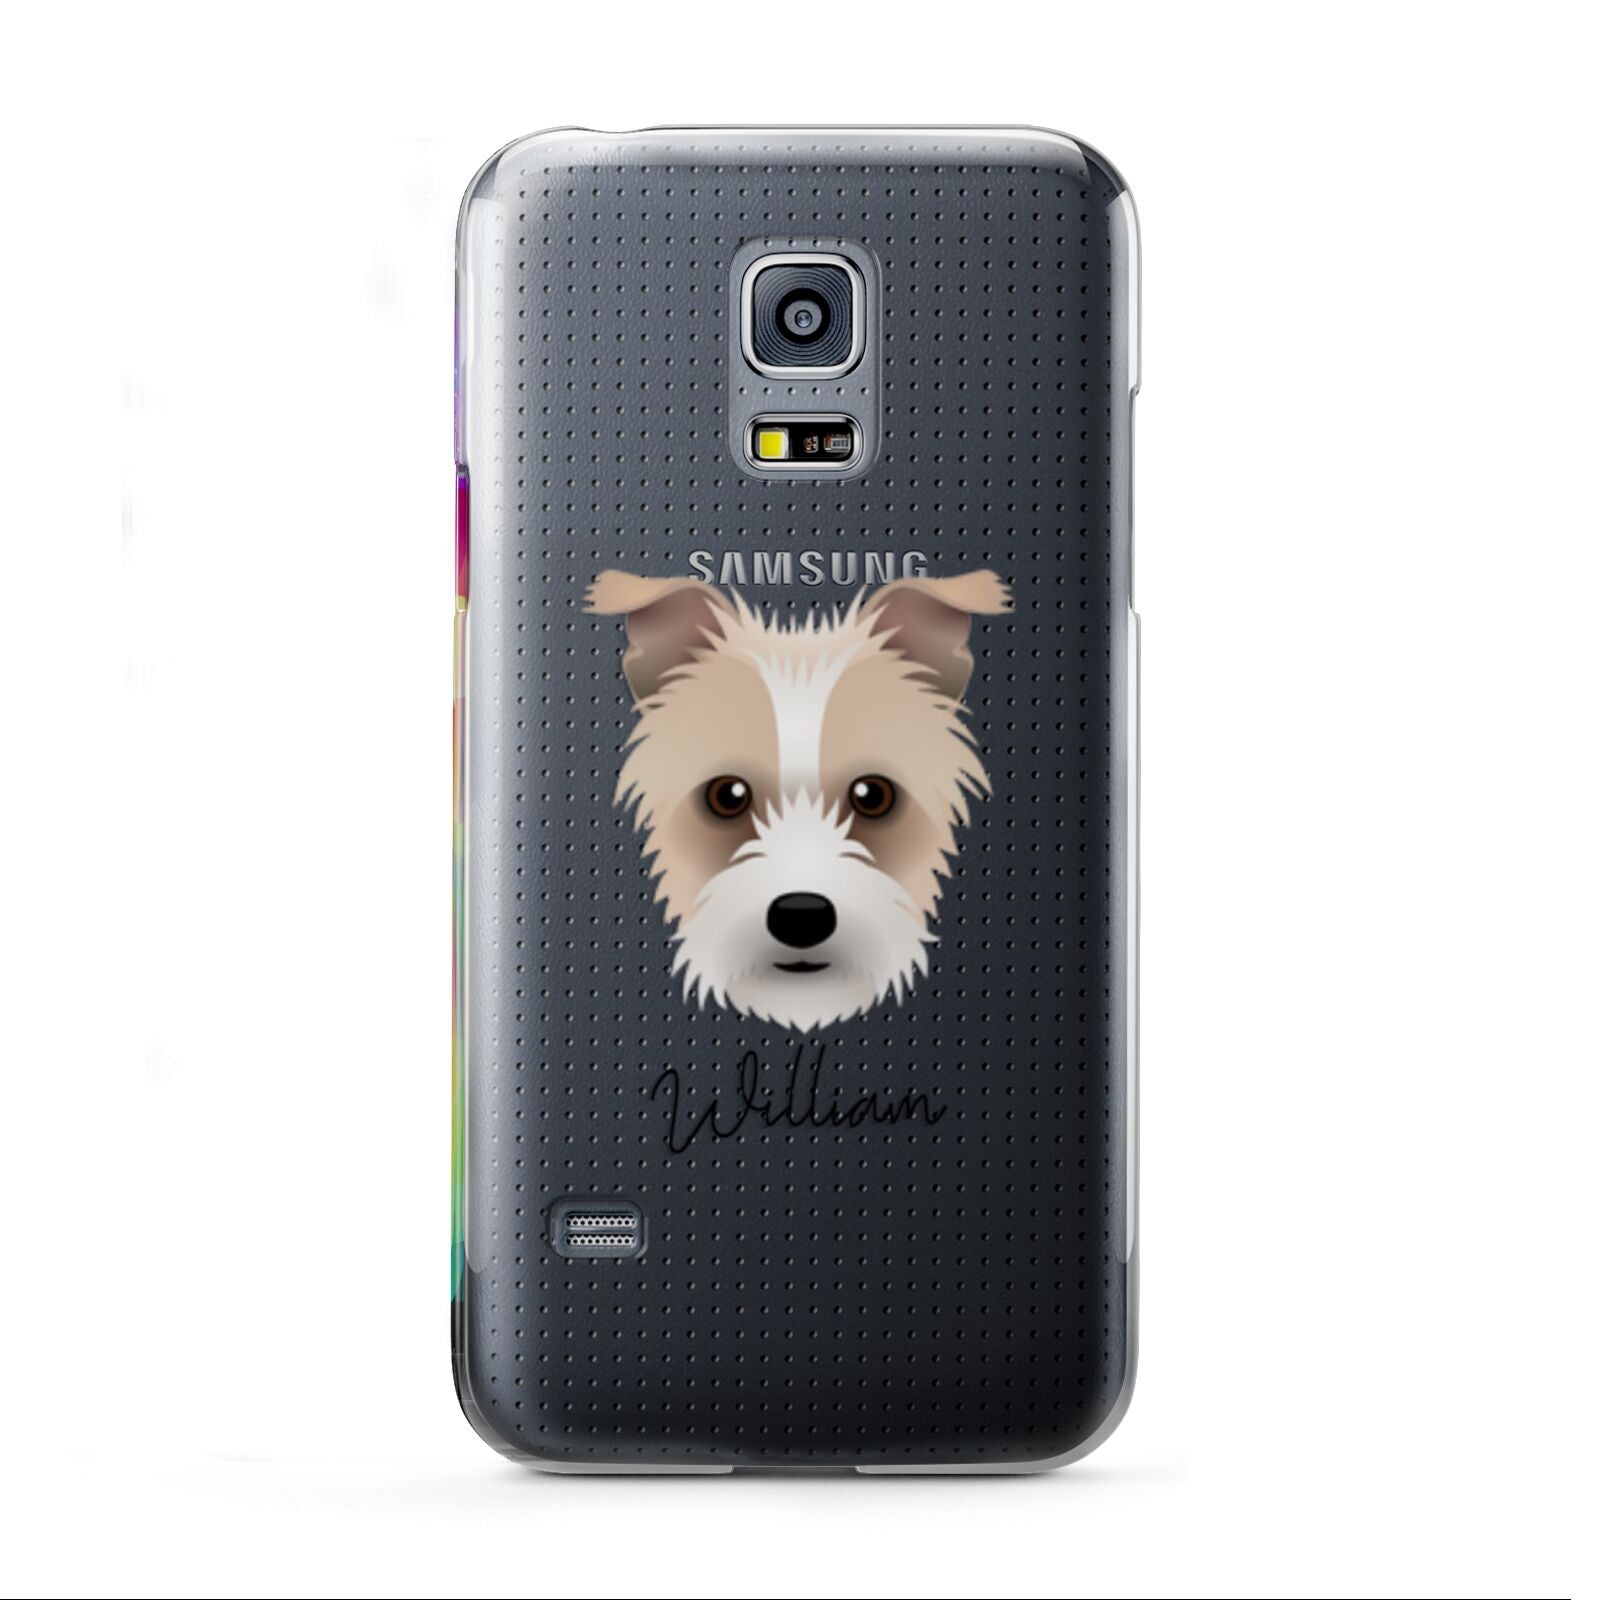 Sporting Lucas Terrier Personalised Samsung Galaxy S5 Mini Case